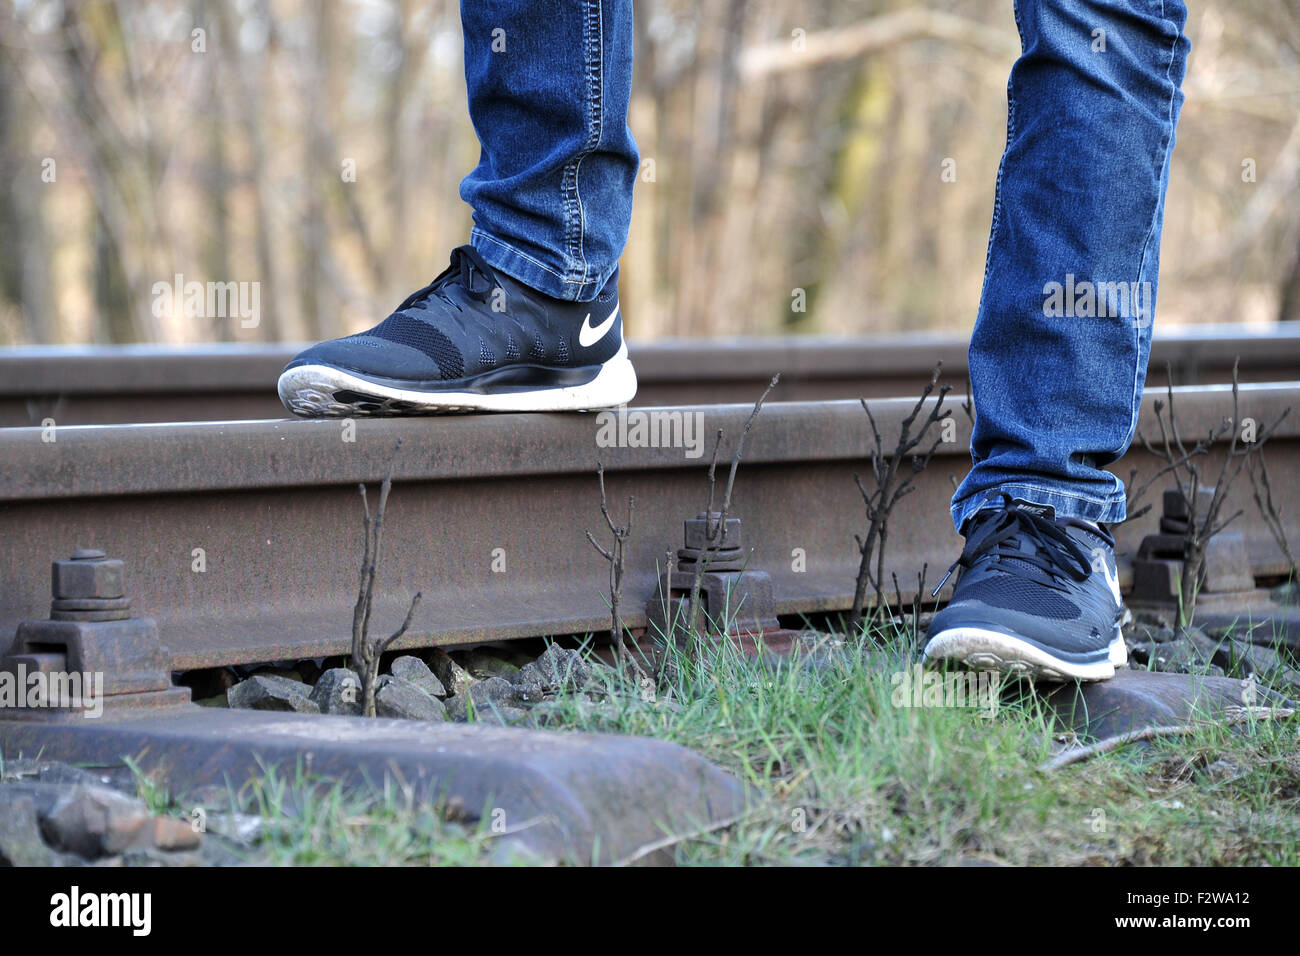 09.05.2015, Sandkrug, Lower Saxony, Germany - Teenager standing on a railroad track. 0HD150509D046CAROEX.JPG - NOT for SALE in Stock Photo